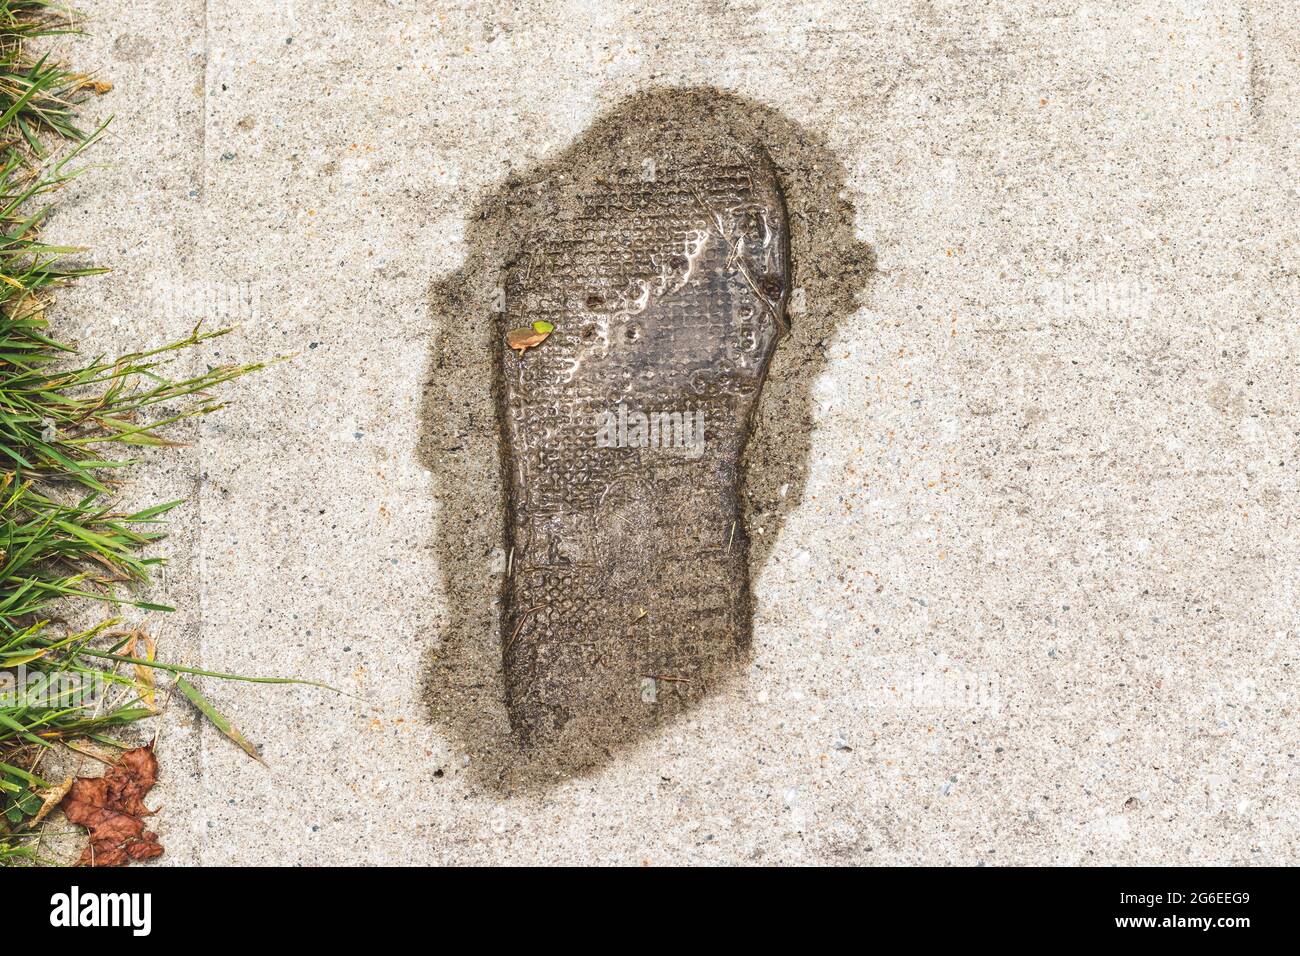 Shoe print imprinted in cement, stained wet from the rain, with a small pool of water in it. Grass on the side of the paved sidewalk. Stock Photo